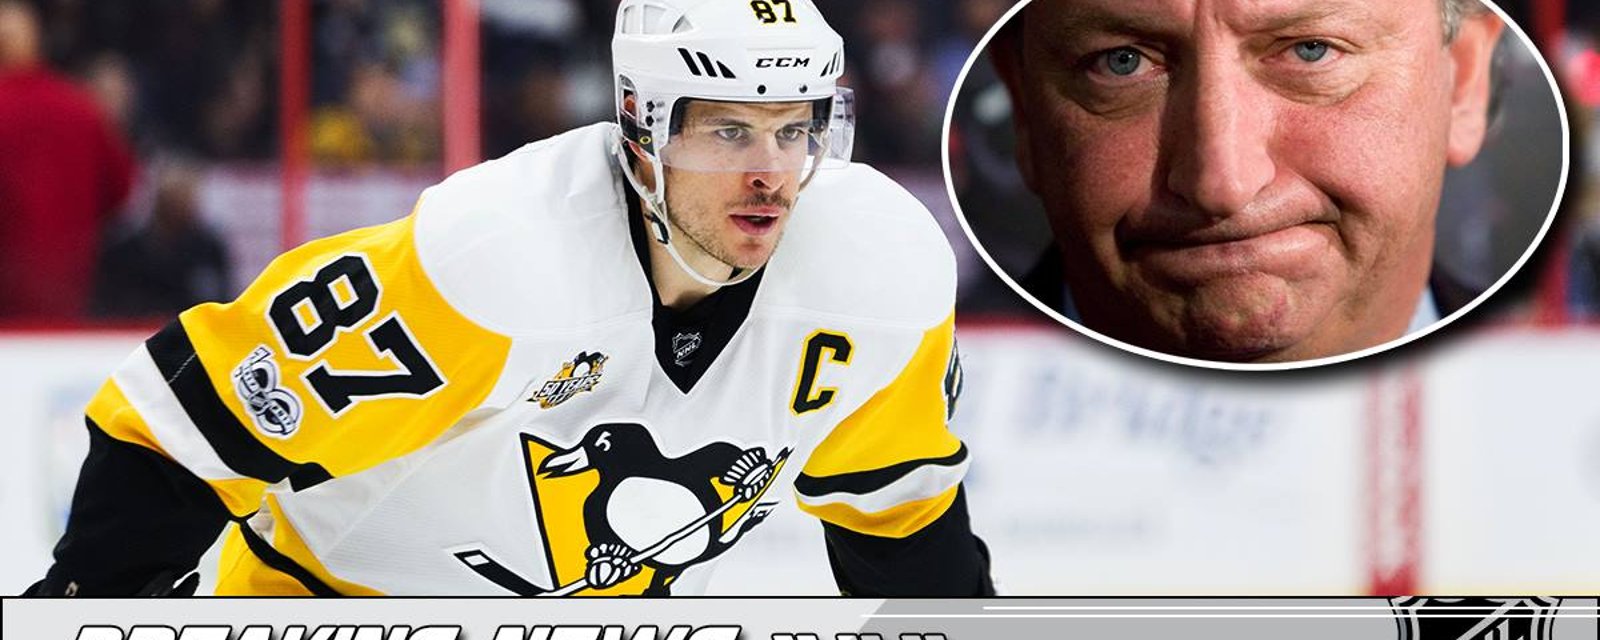 Breaking: Sidney Crosby's agent DESTROYS NHL owner over comments made today.